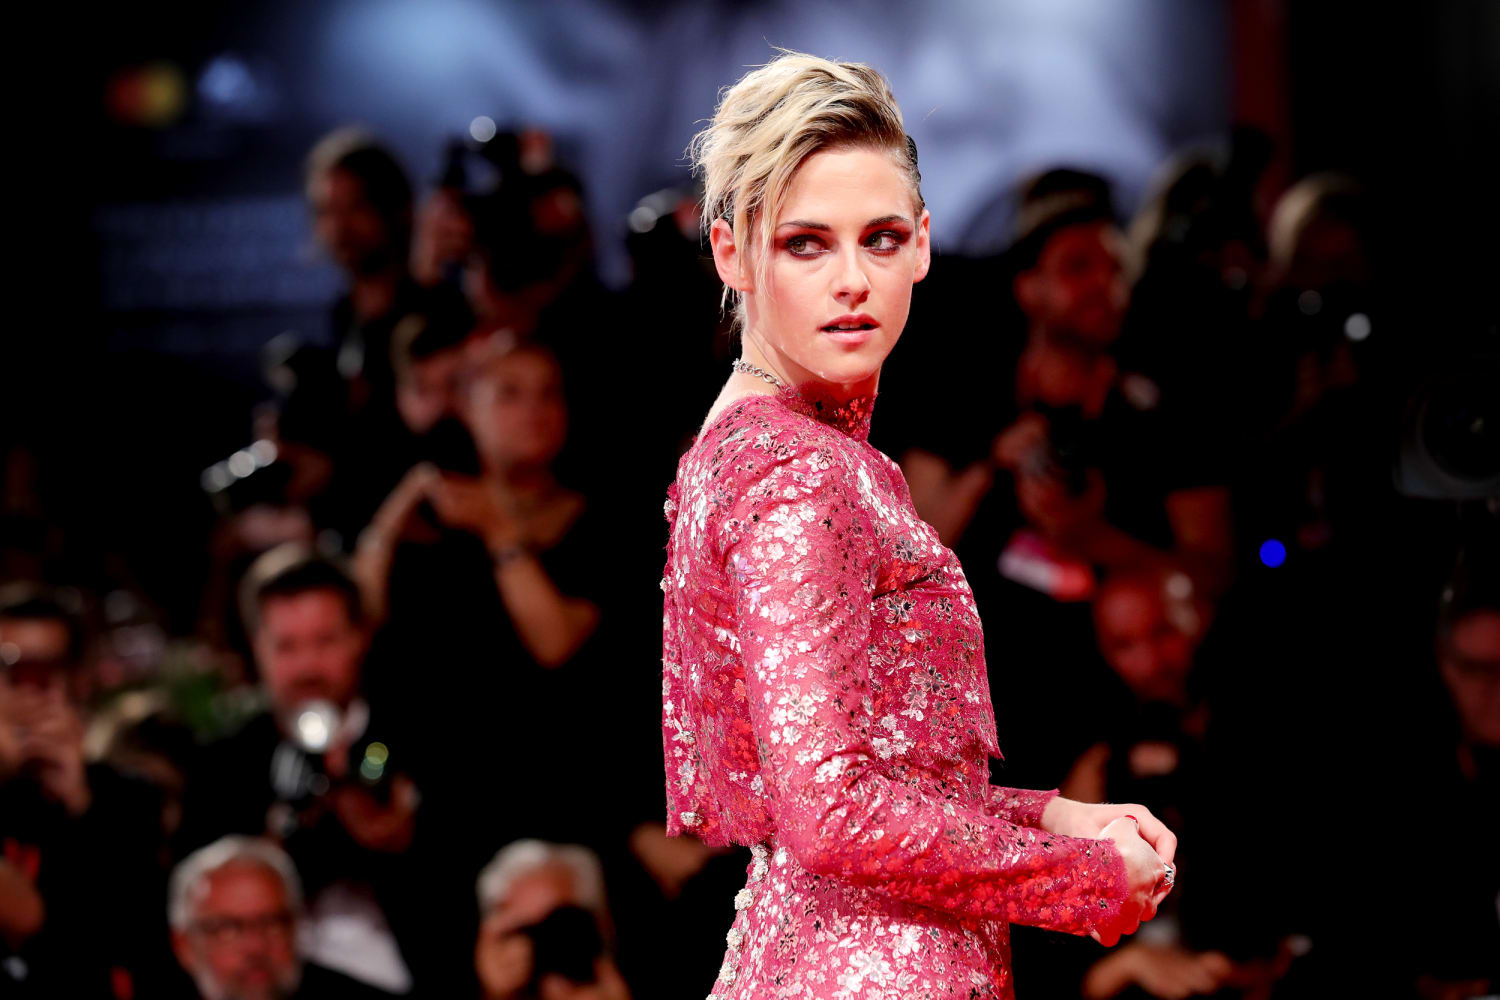 Kristen Stewart claims she was advised to hide her sexuality